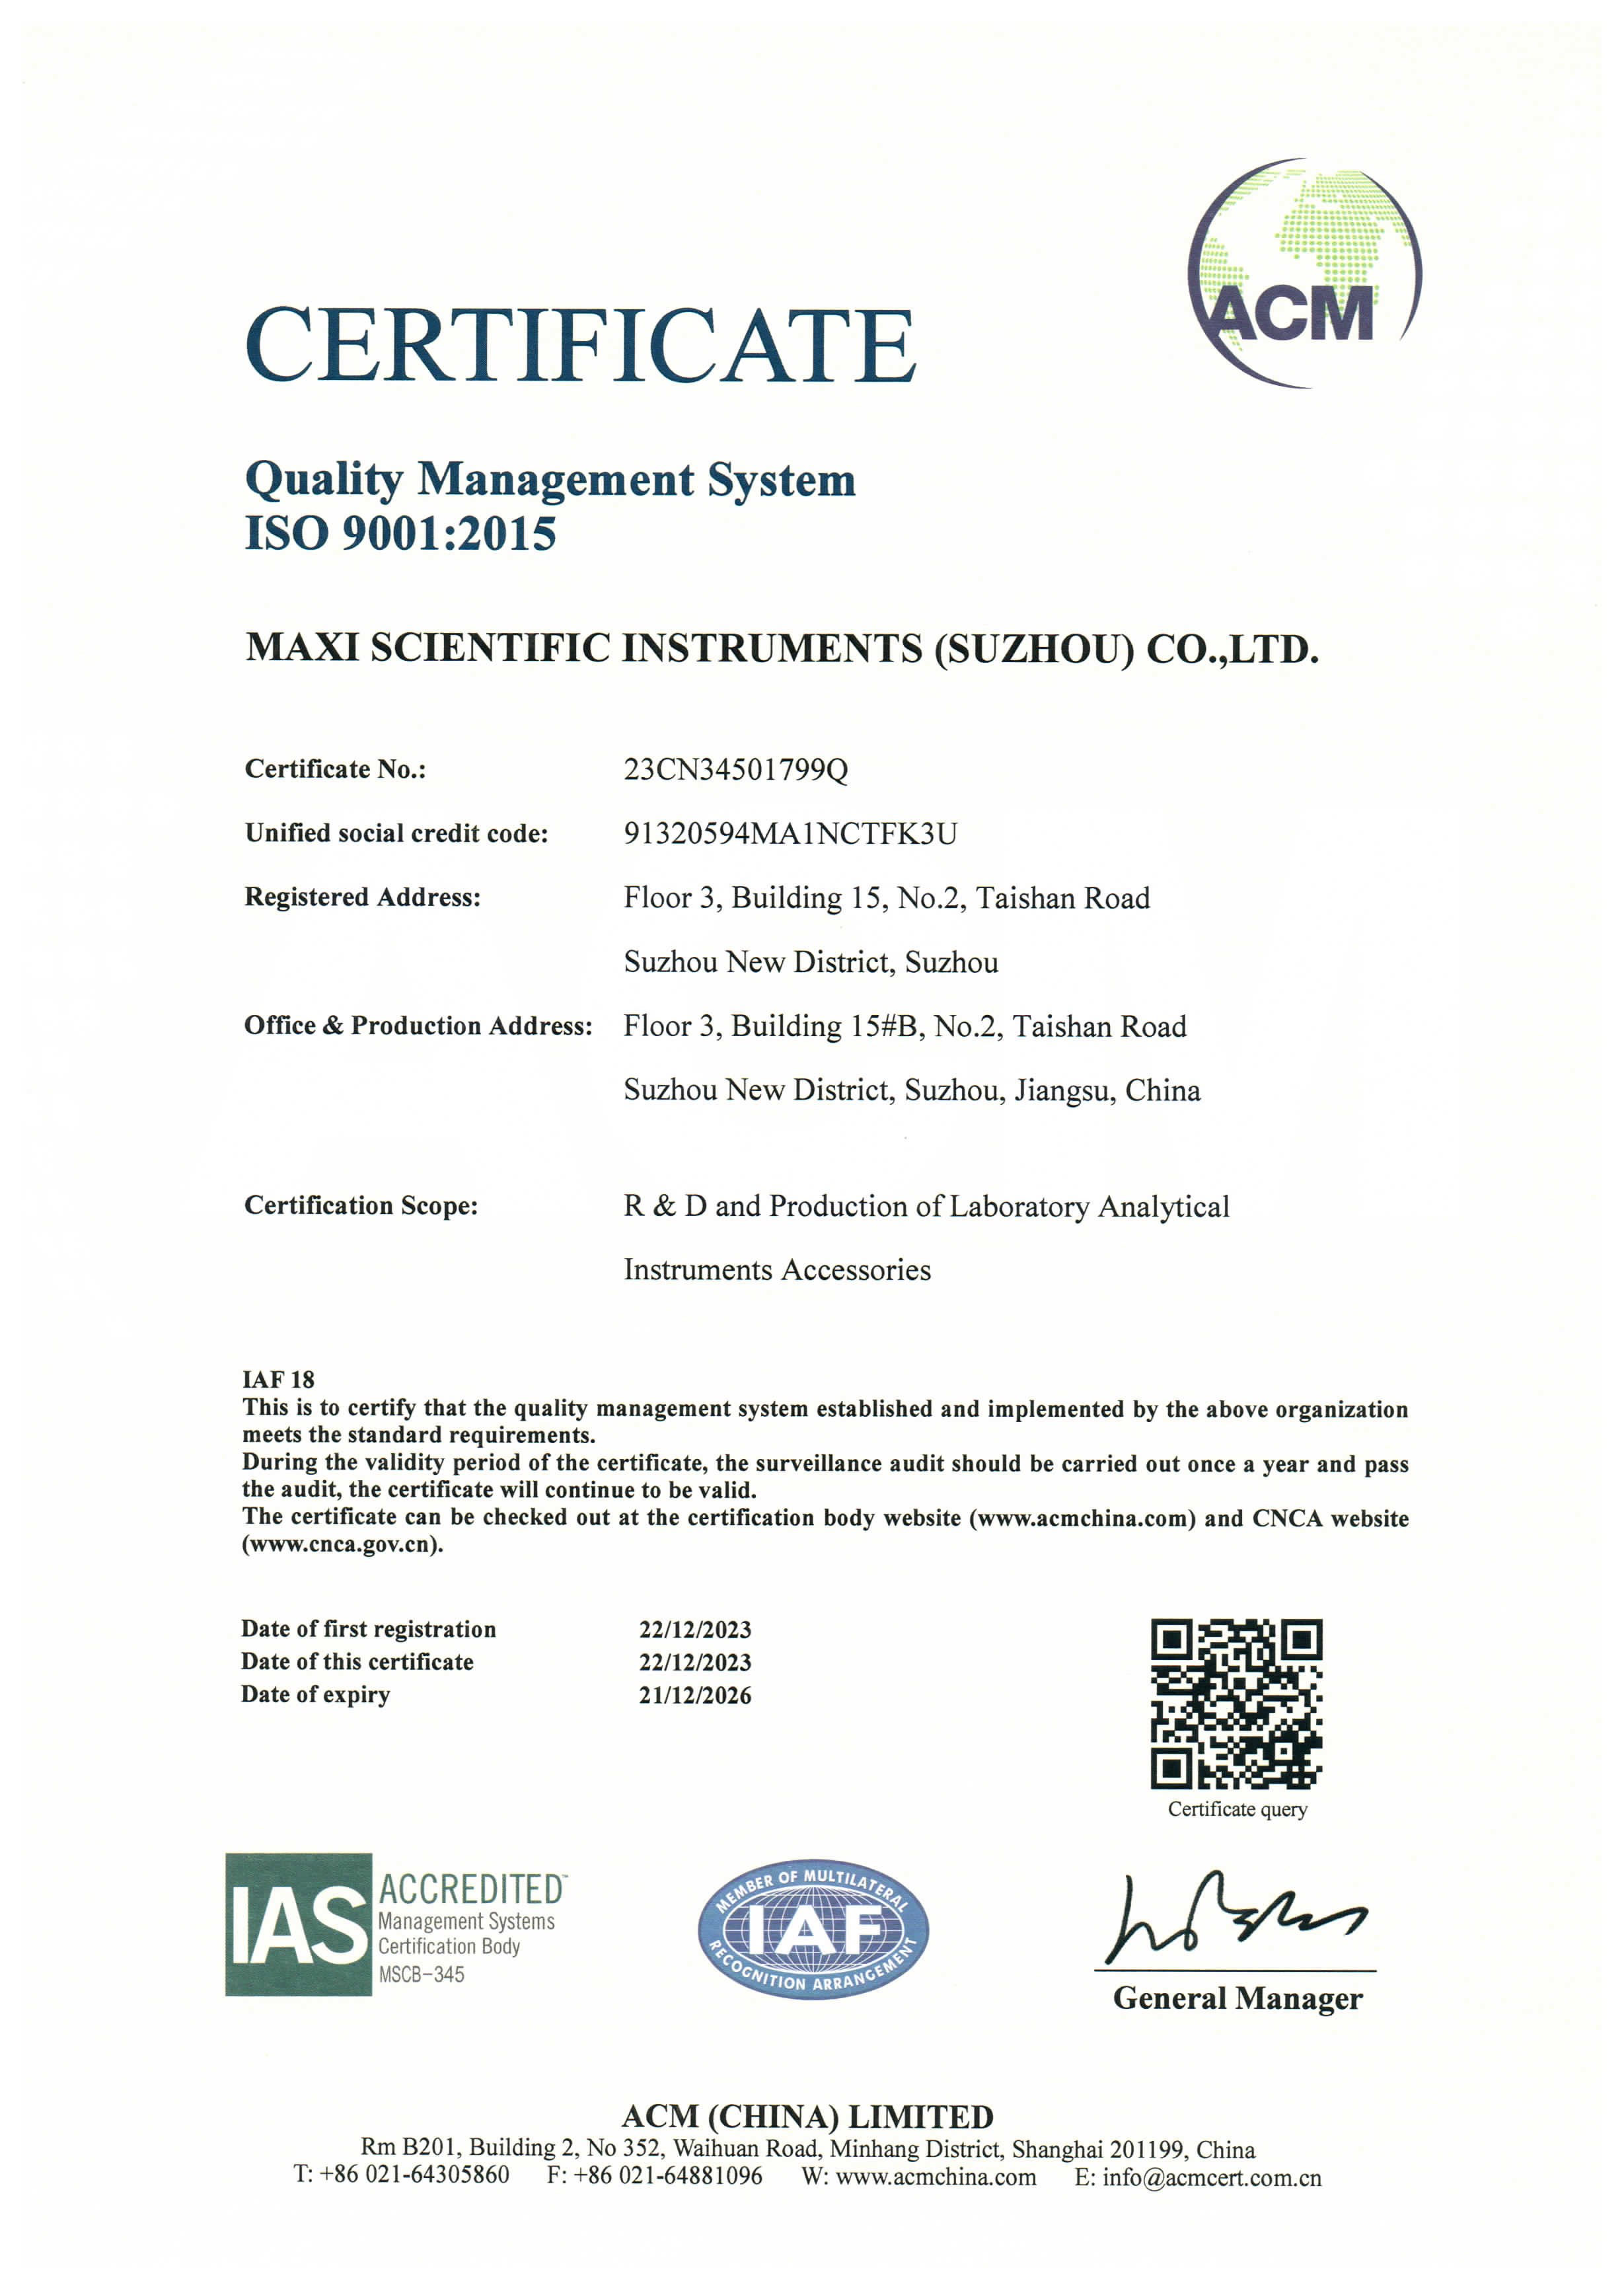 Congratulation on Maxi Passing the ISO 9001:2015 Certification